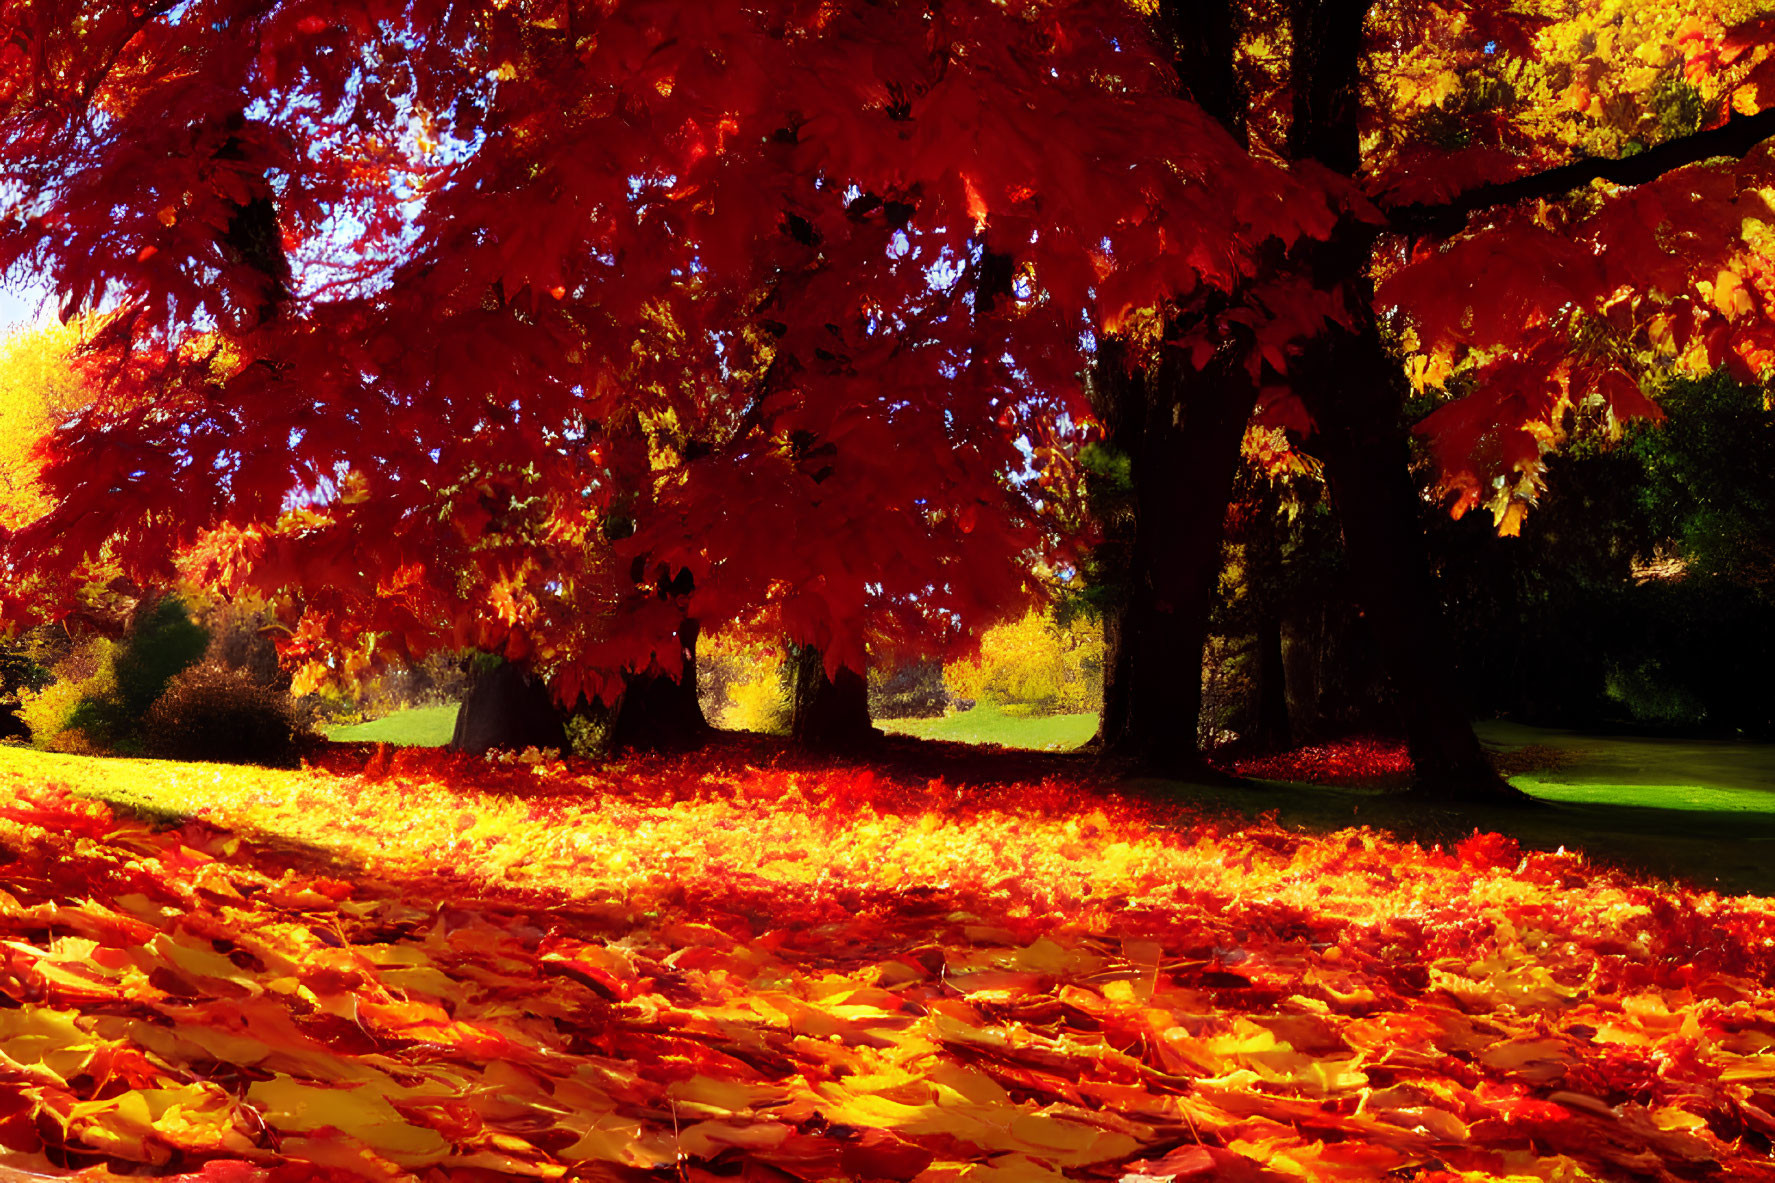 Colorful autumn foliage with red and orange leaves under sunlight